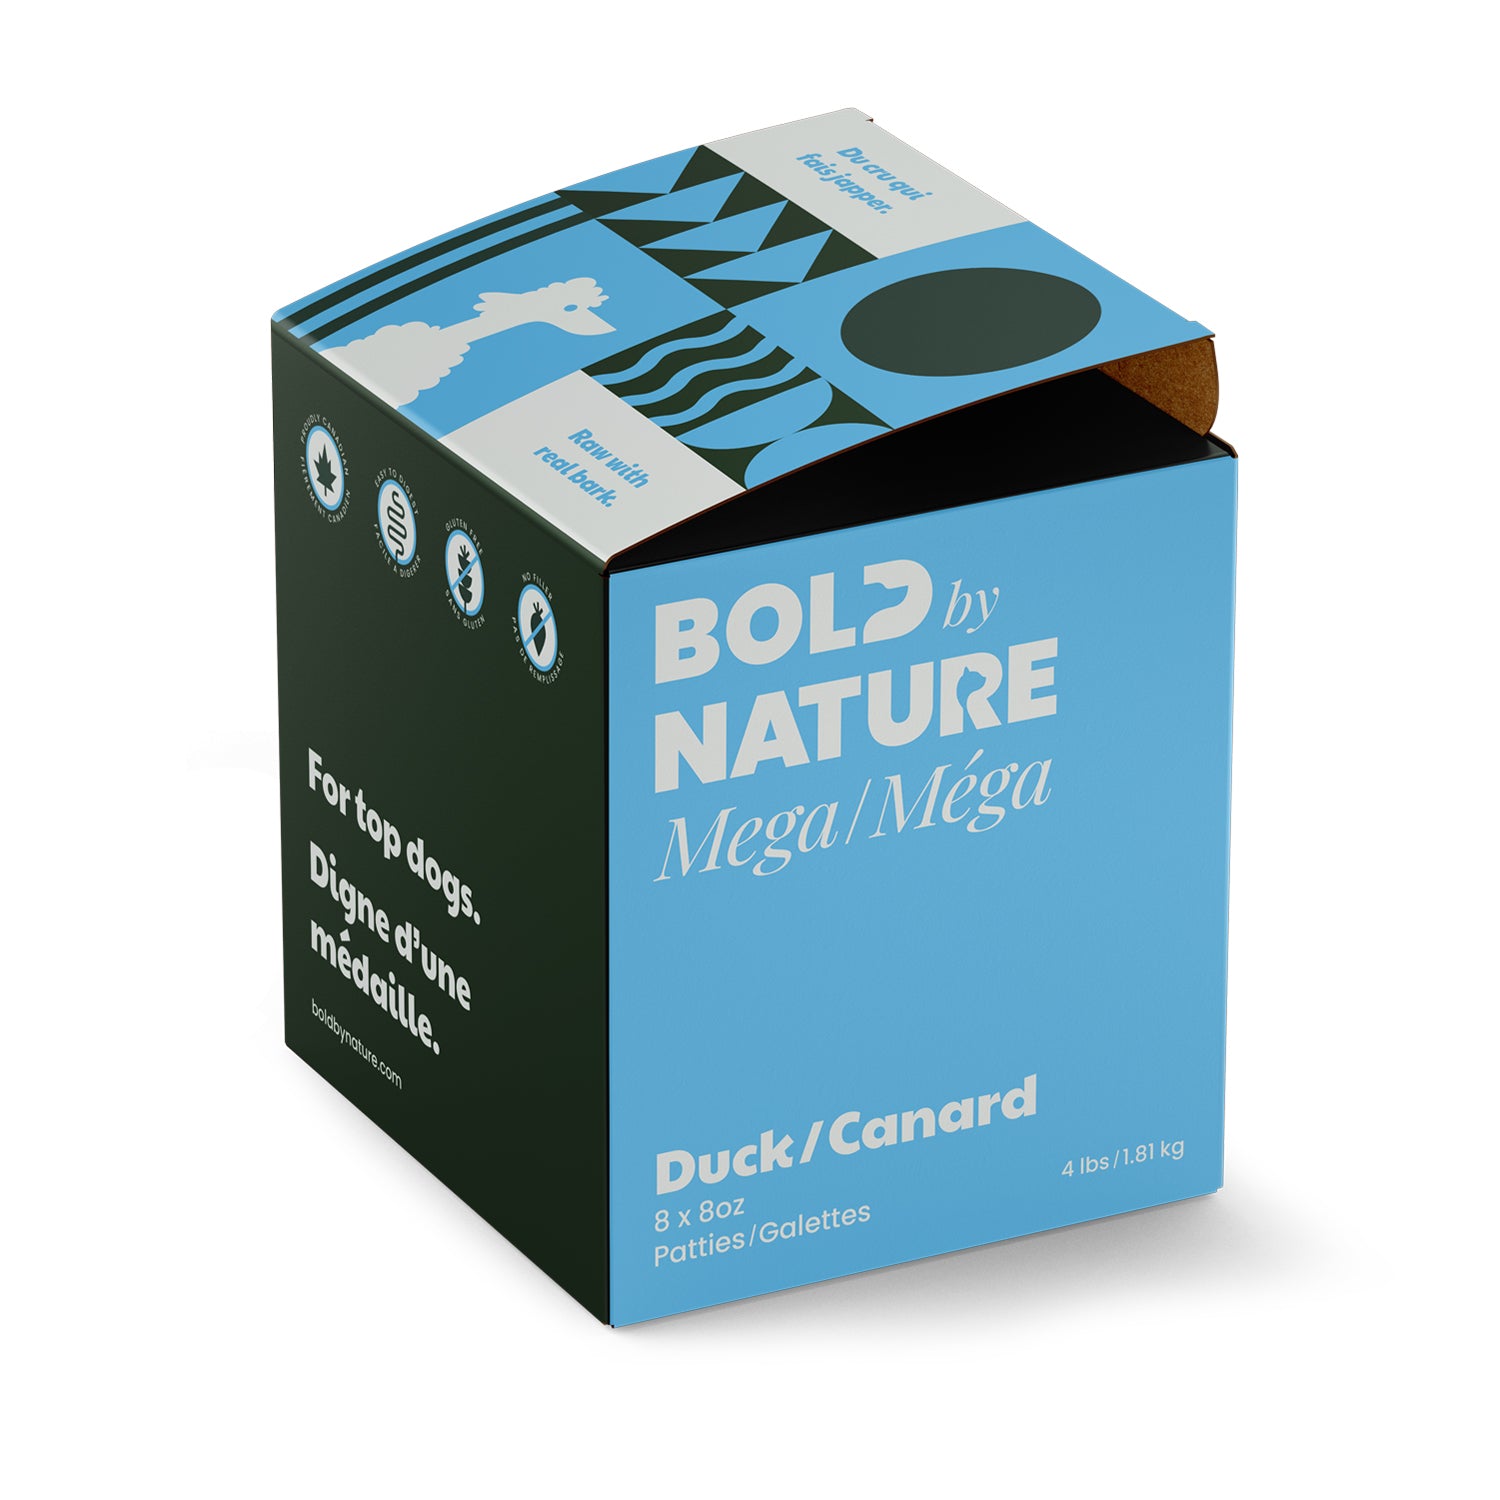 Bold by Nature - Mega Frozen Raw Duck Patties Dog Food (1.81kg/4lb) - Small Blue Box